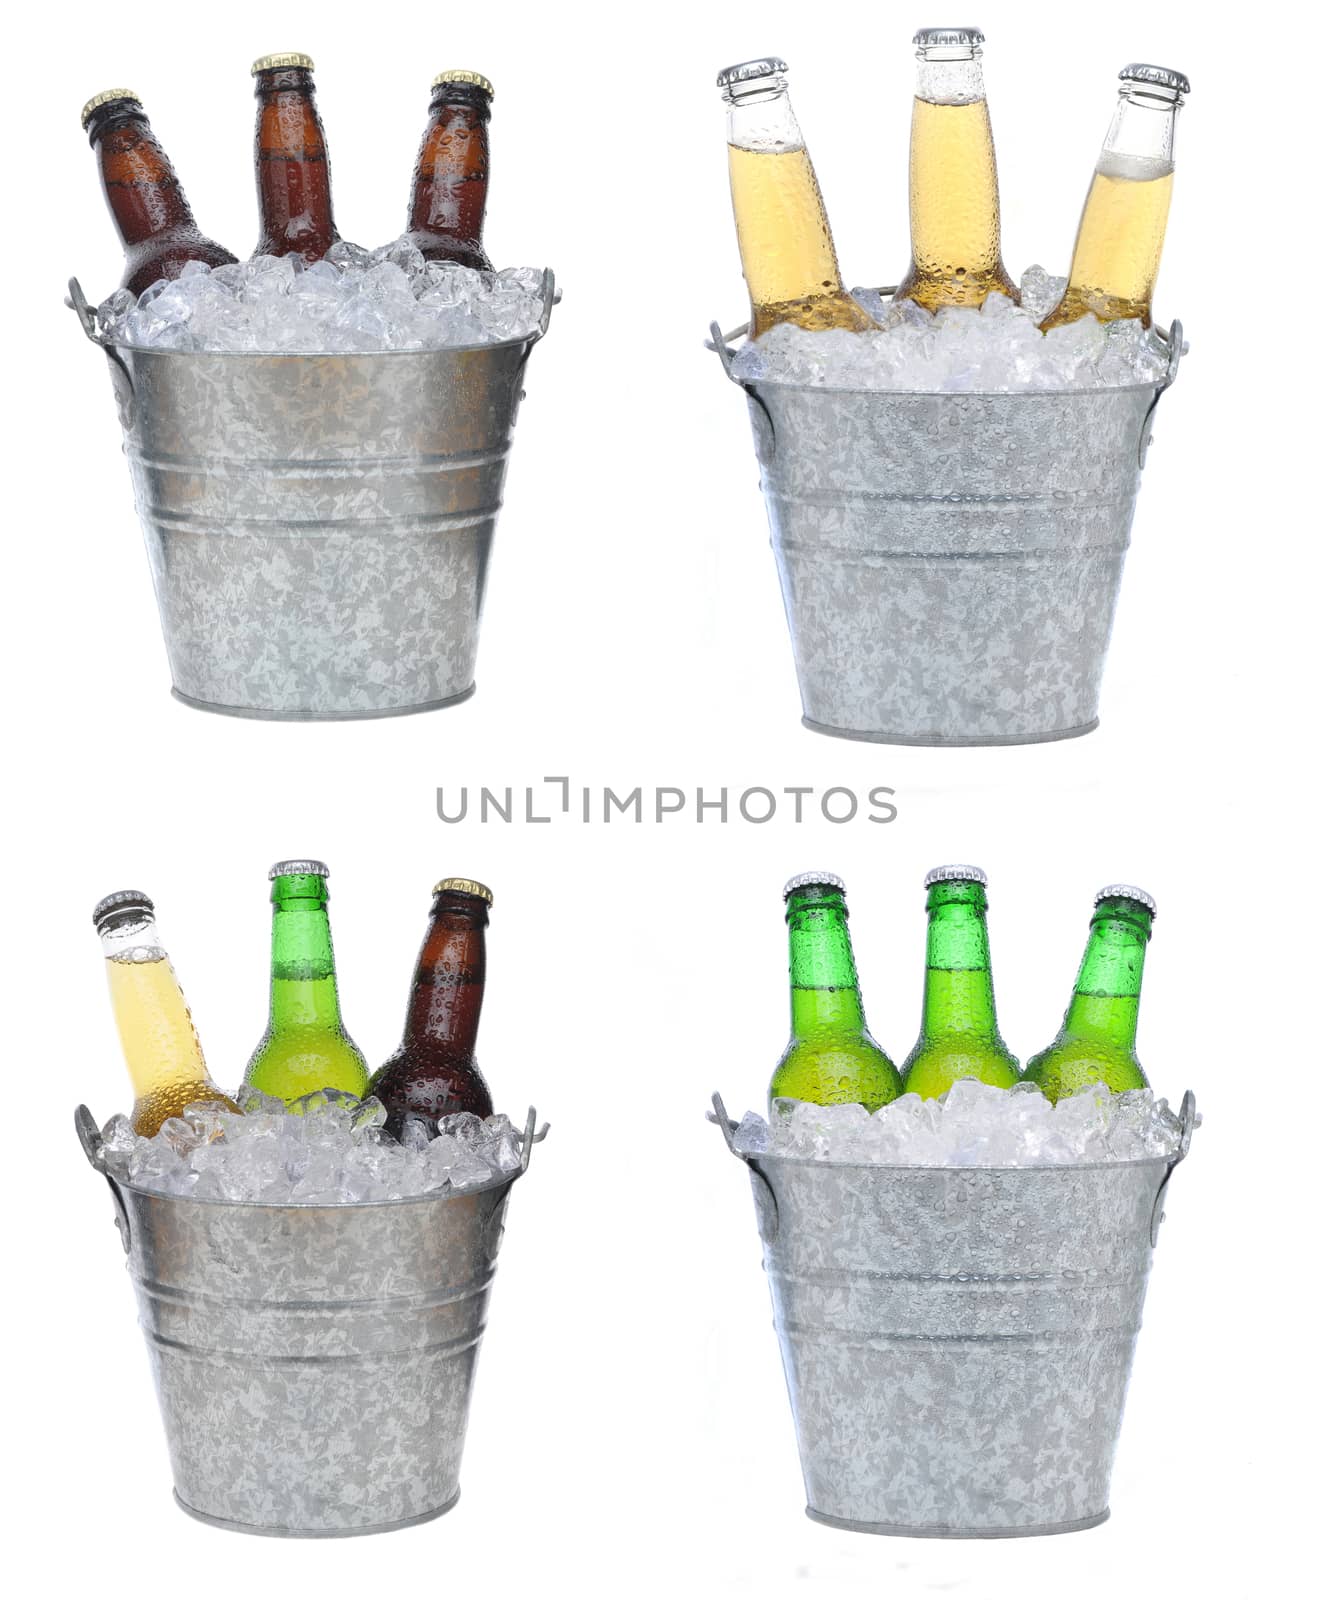 Four buckets holding three each of different beer bottles in ice. The bottles are covered with condensation and isolated on white.